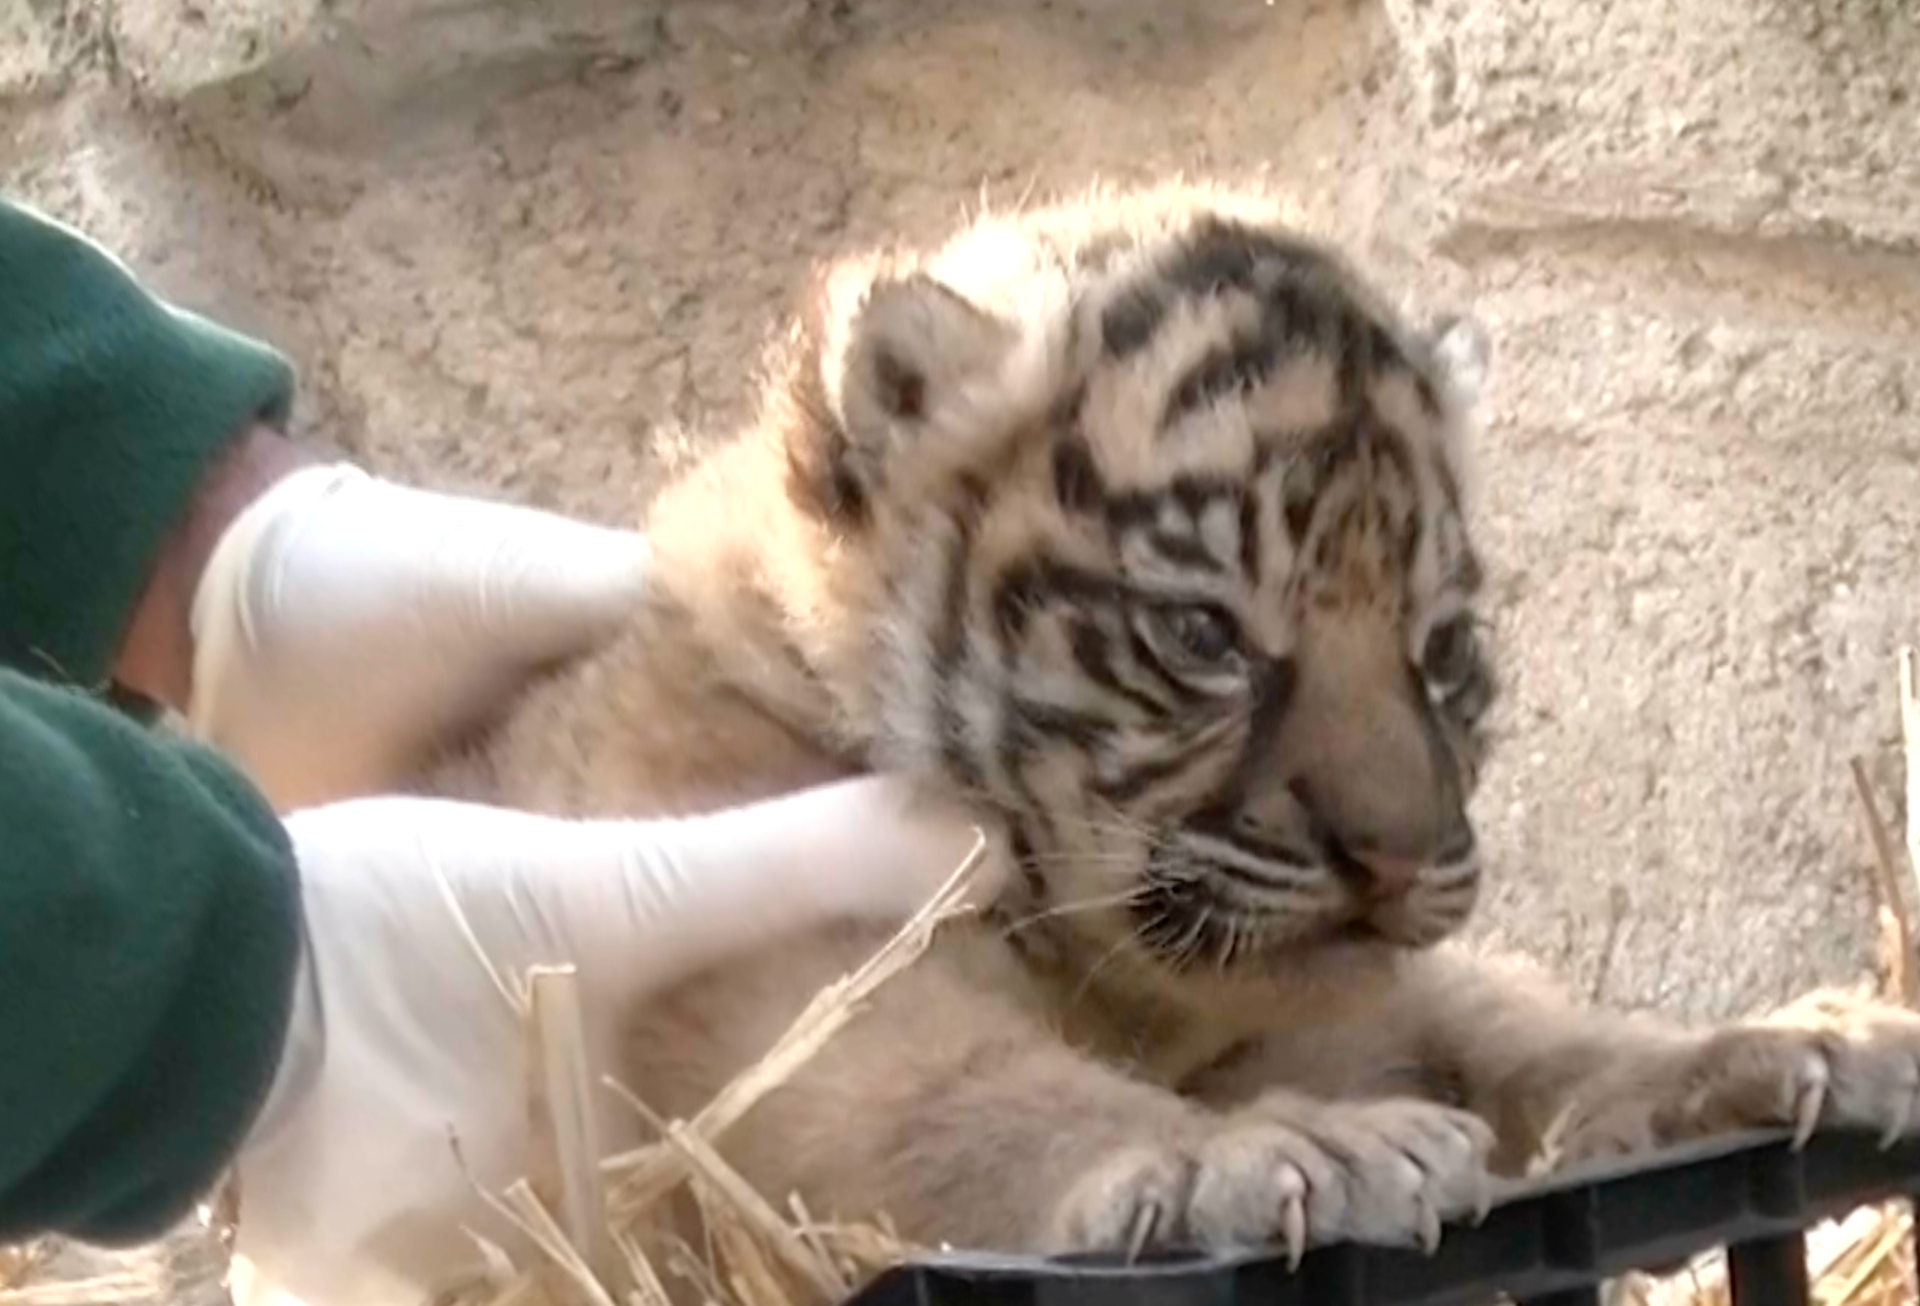 Video shows rare Sumatran tiger cub and mother on first days together | Wildlife News